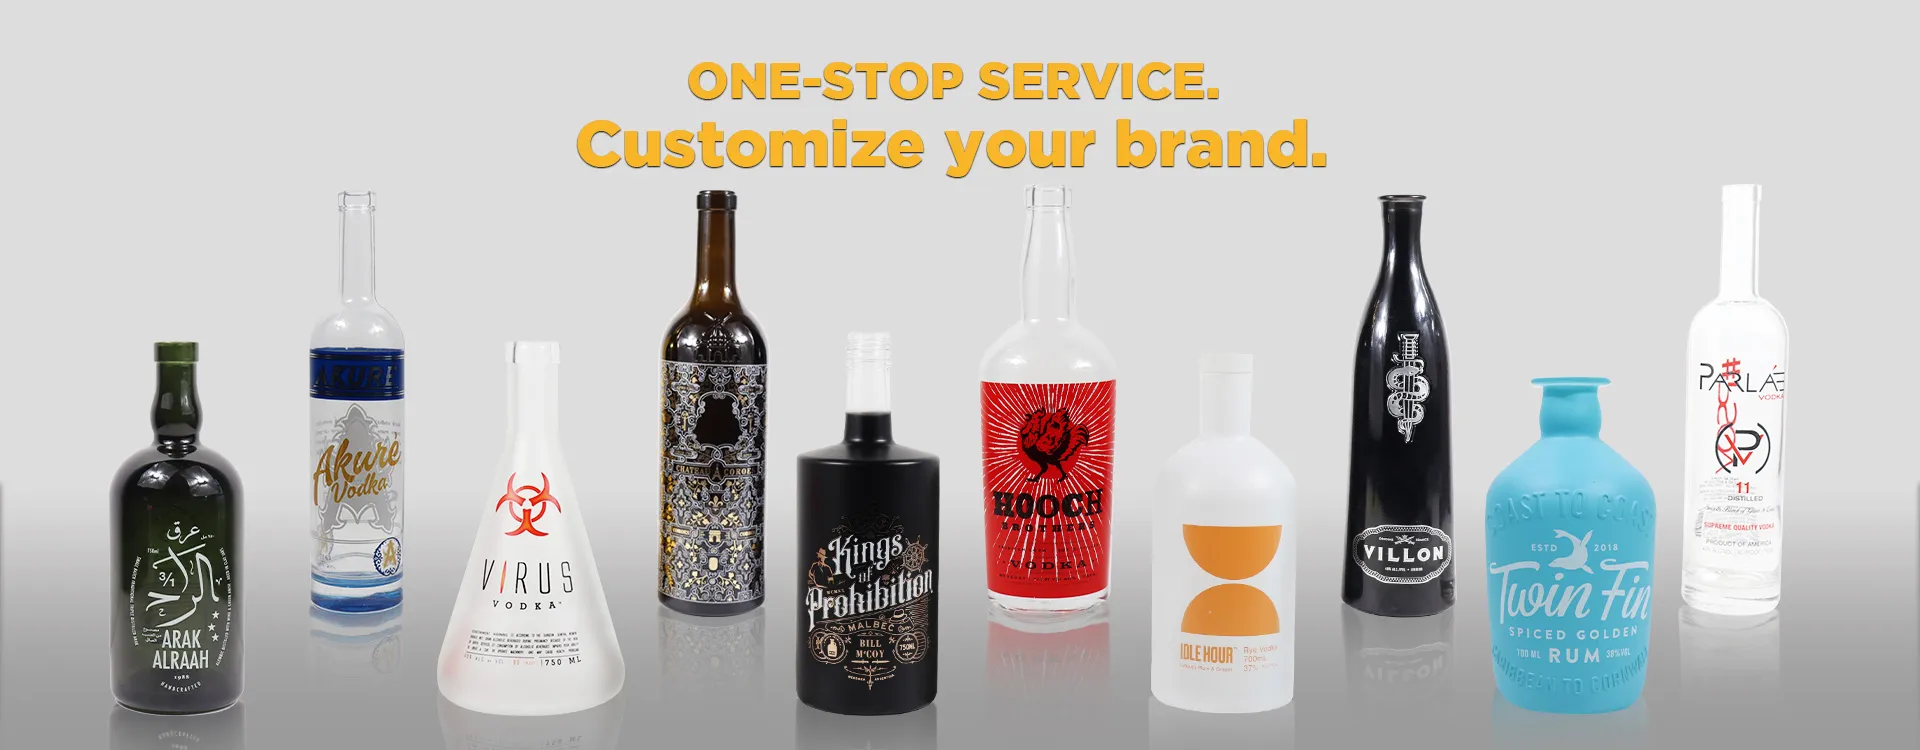 Customize your brand